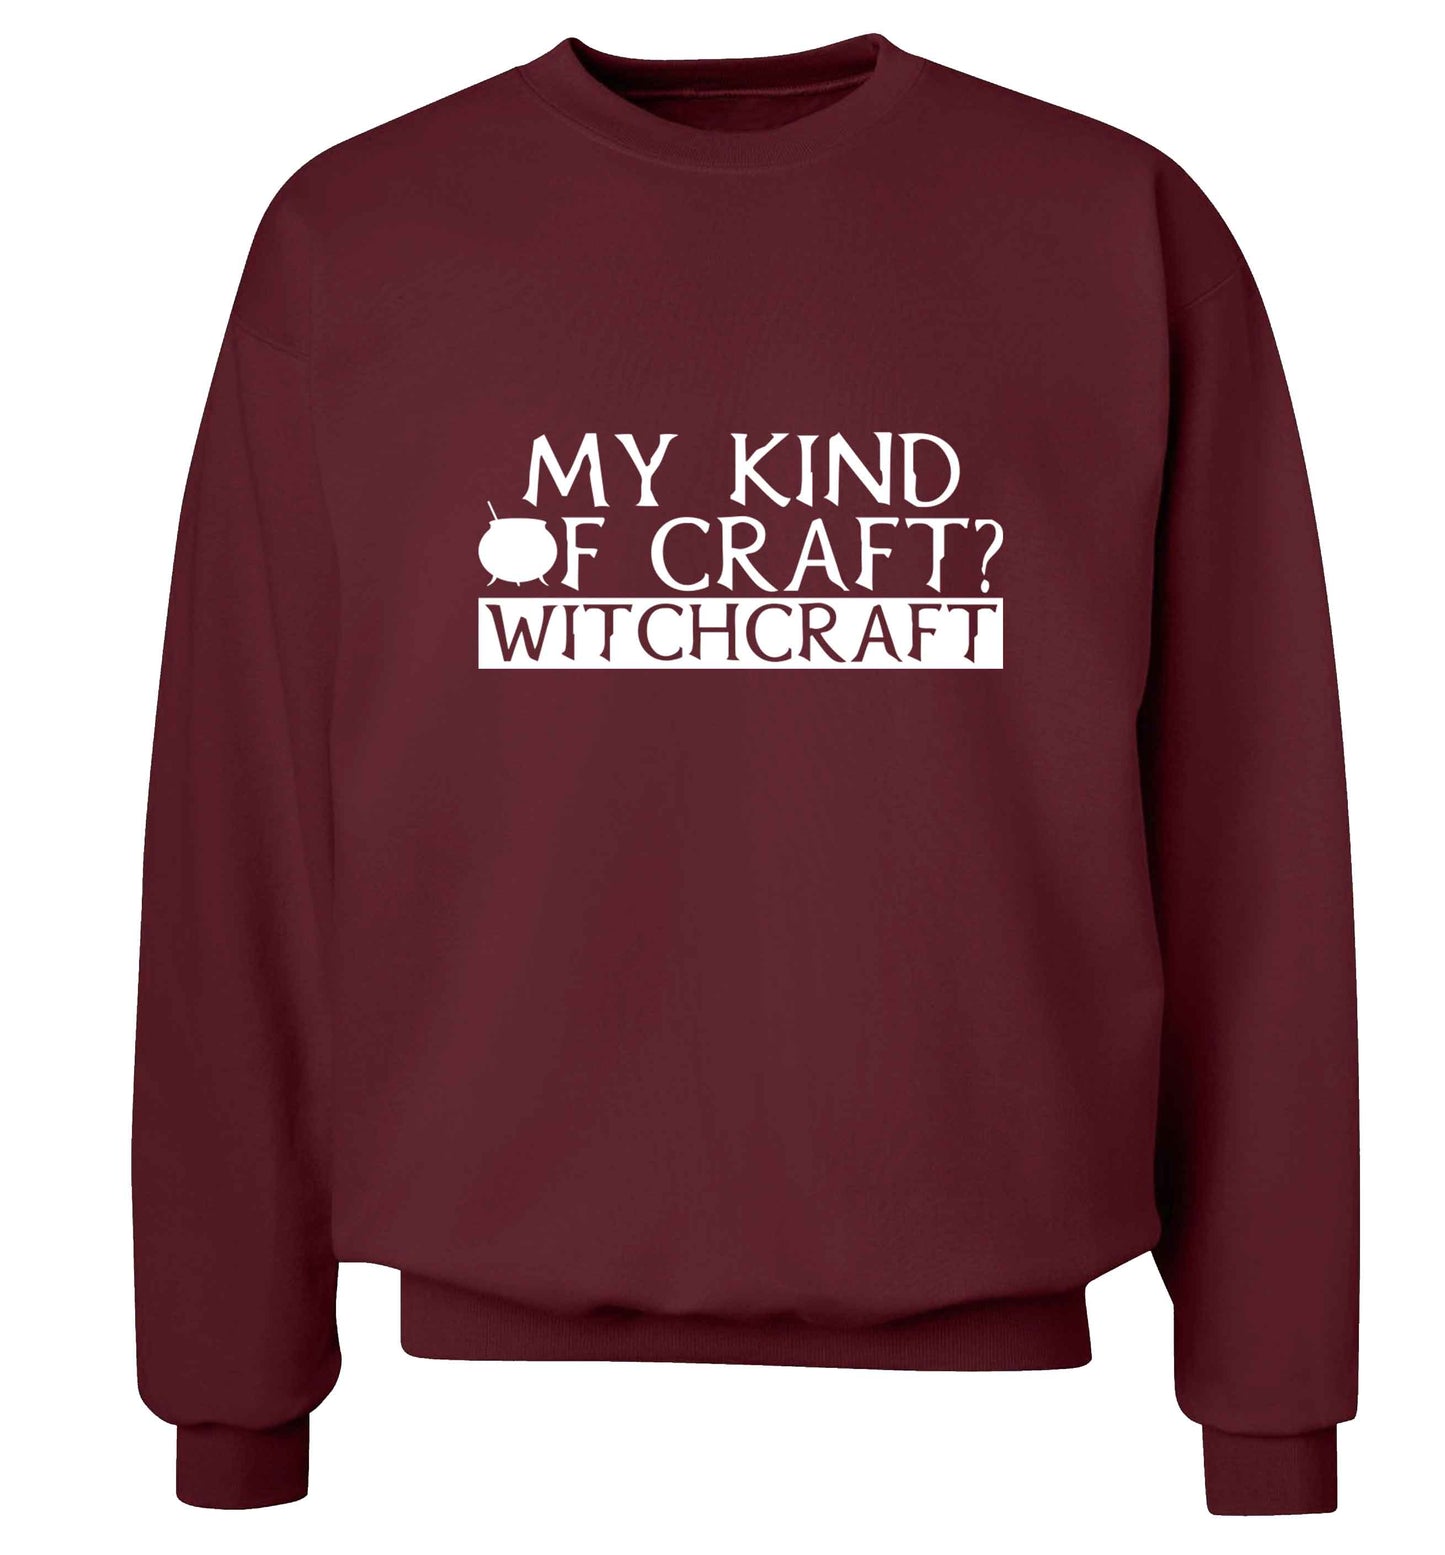 My king of craft? witchcraft  adult's unisex maroon sweater 2XL